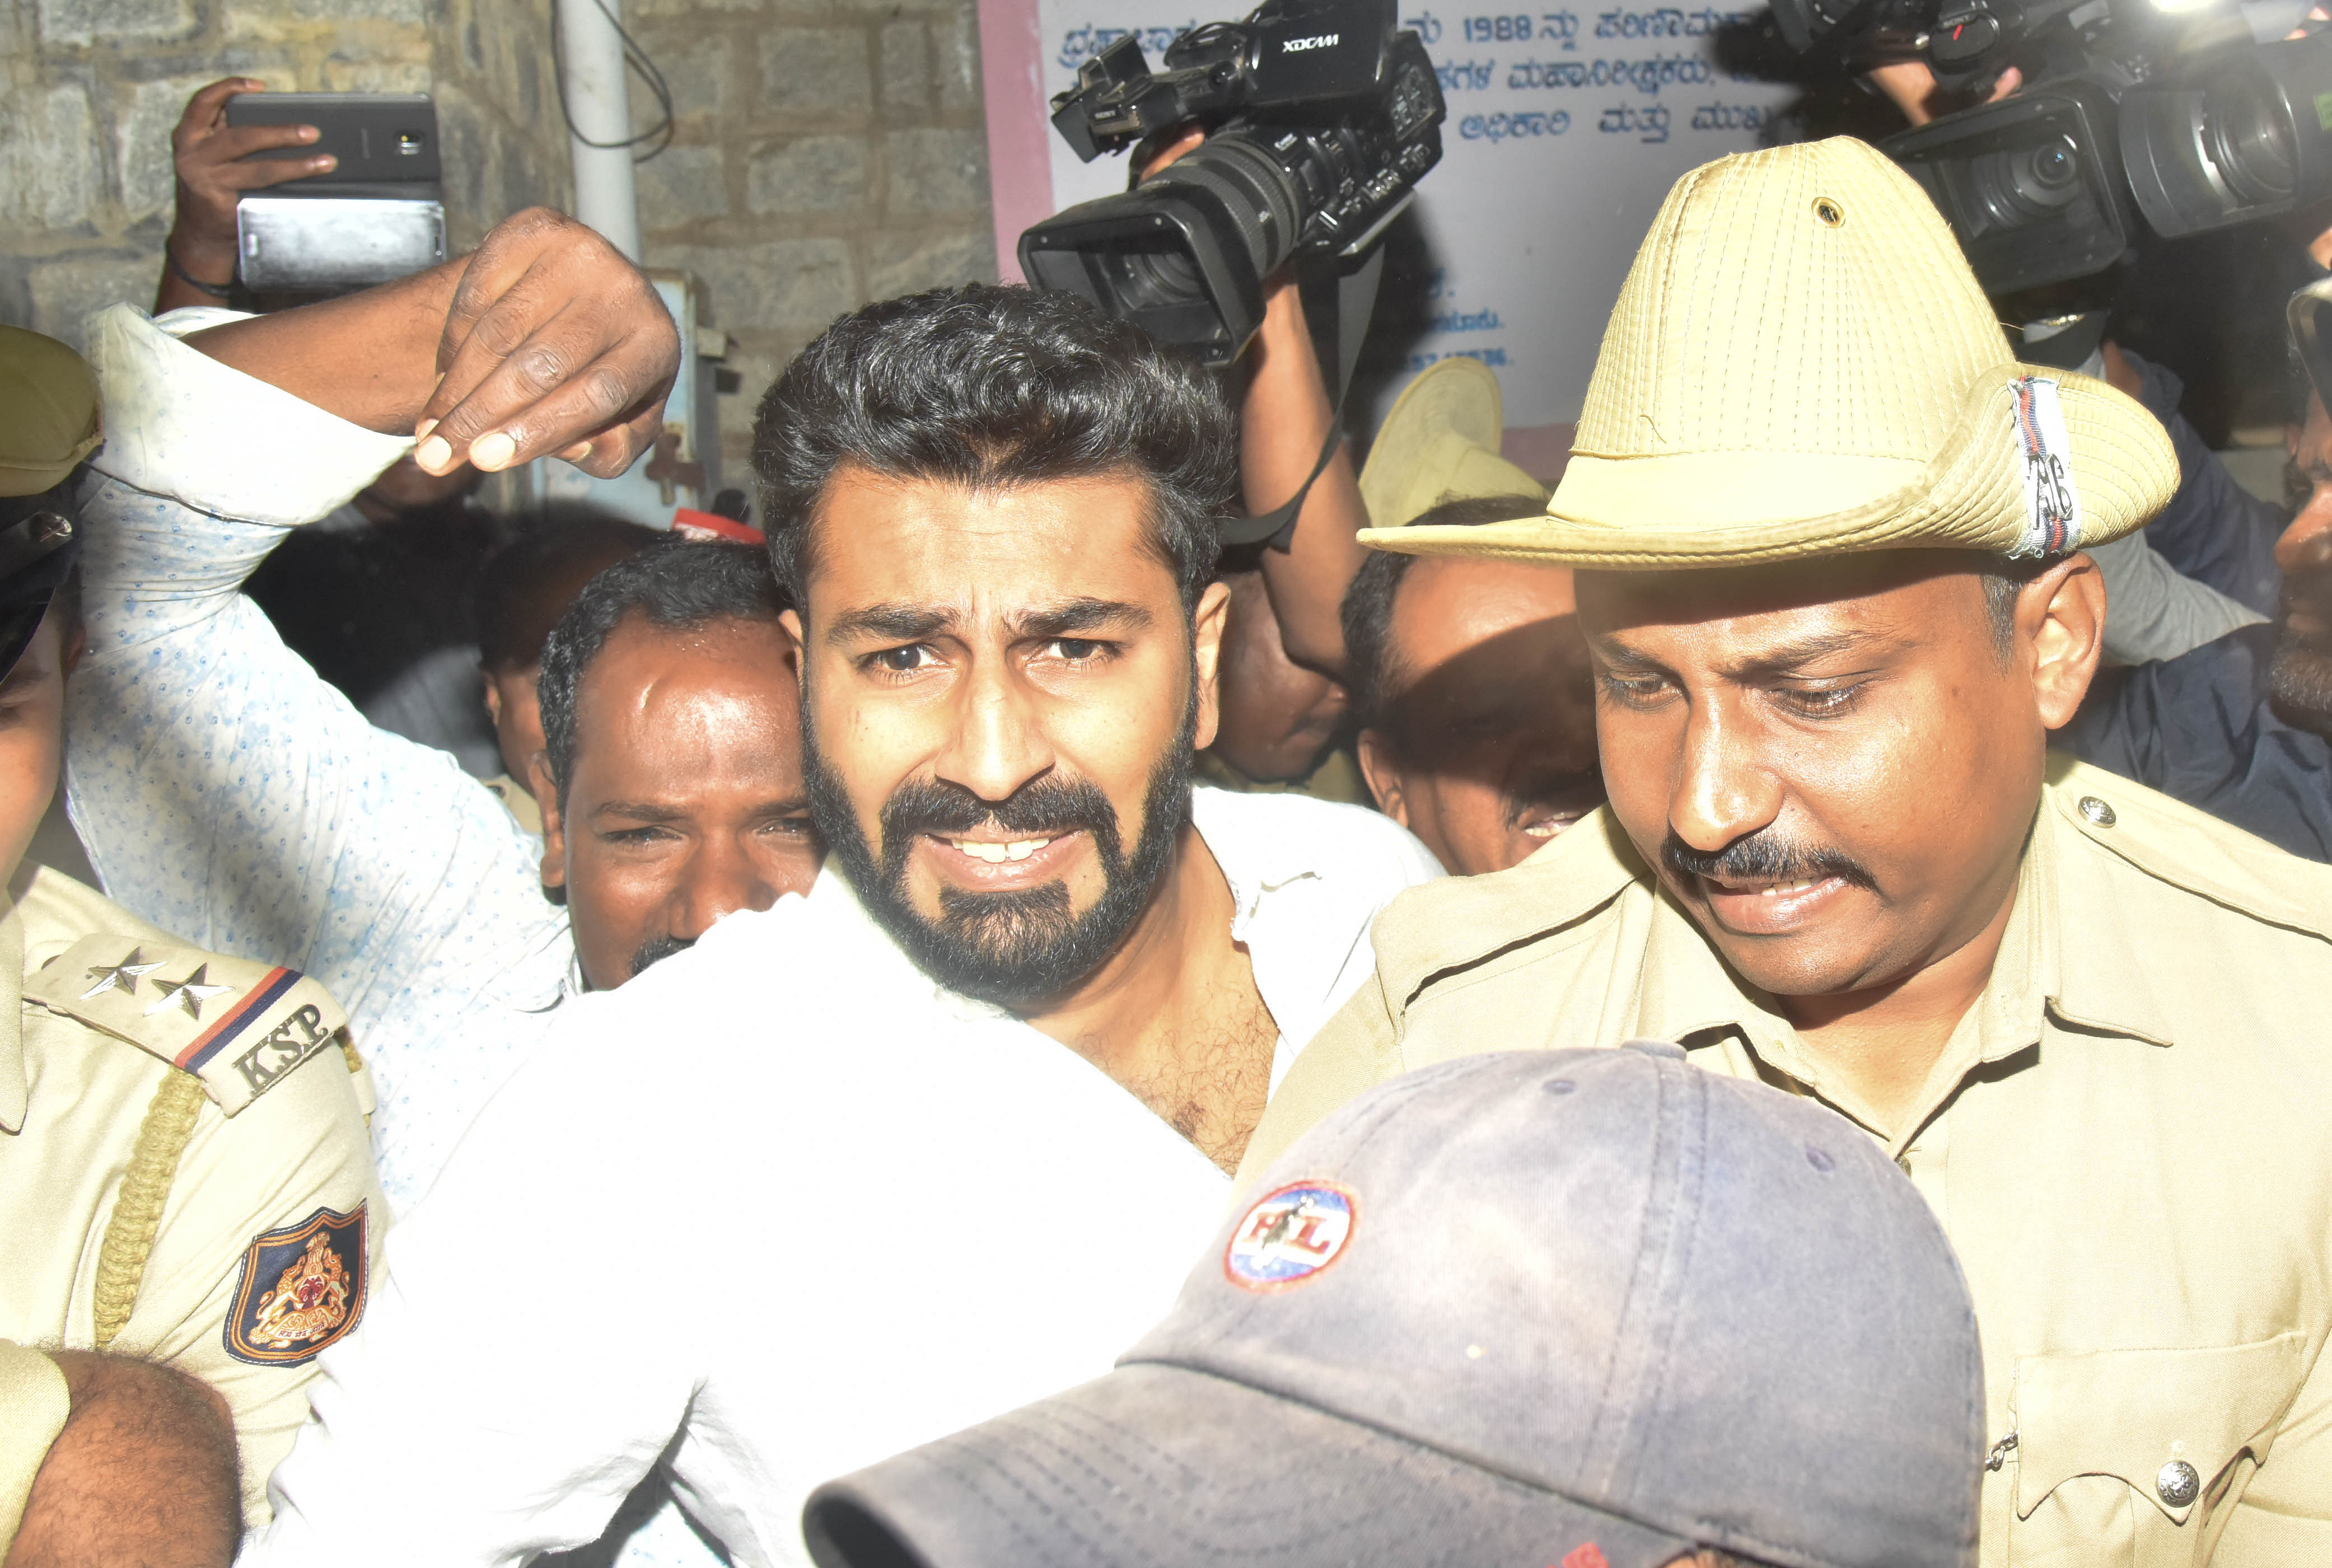 Mohammed Nalapad, son of Shanthinagar Congress MLA N A Haris, walks out of the central jail in Bengaluru after obtaining bail from the Karnataka High Court in the pub assault case. (DH File Photo/Janardhan B K)